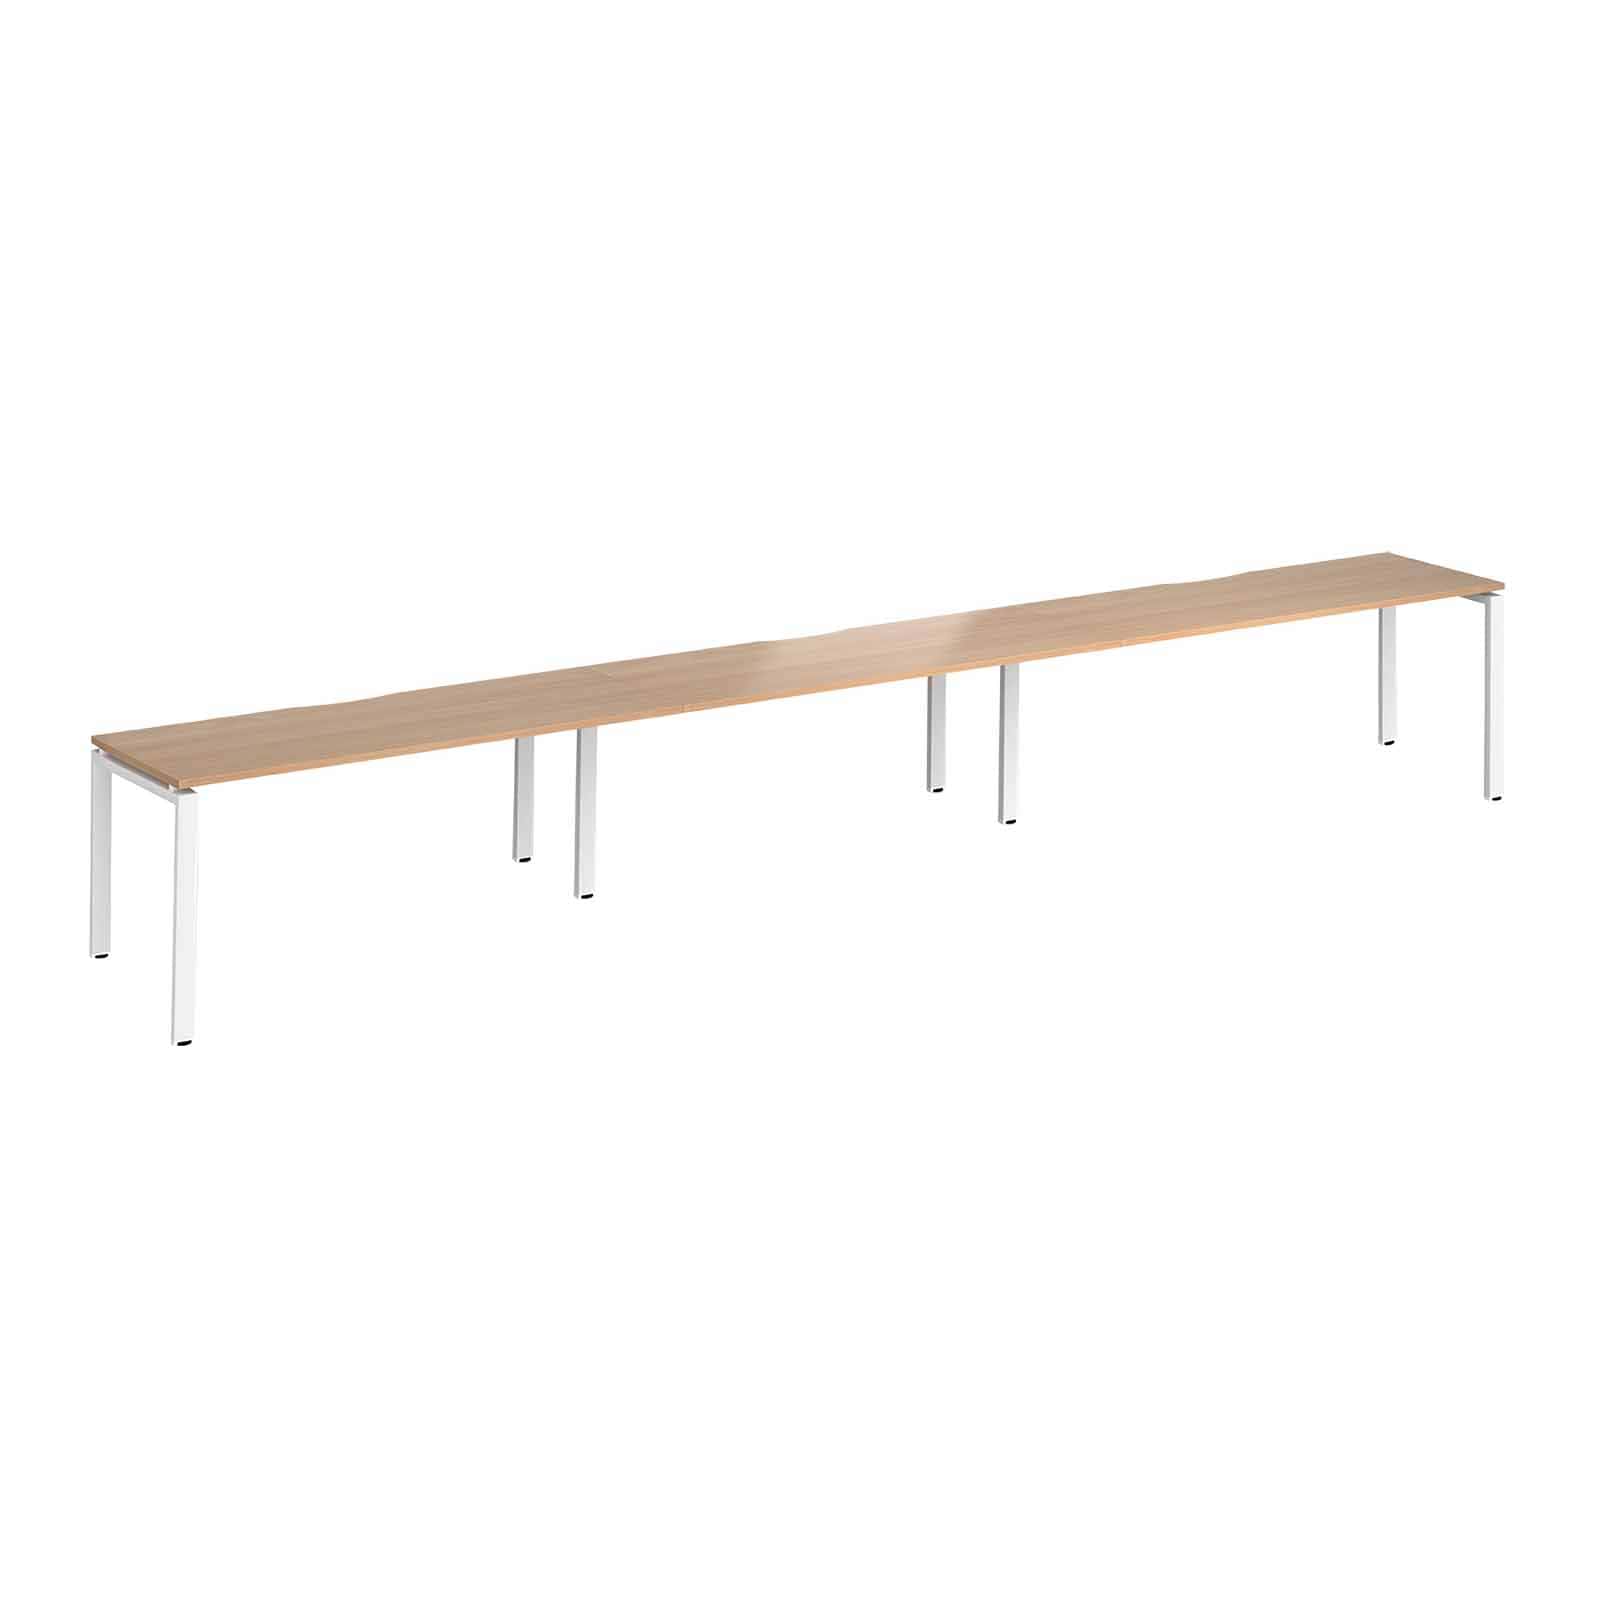 MADE TO ORDER 3 Person Single Row Bench Desk W1000mm x D600mm x H740mm